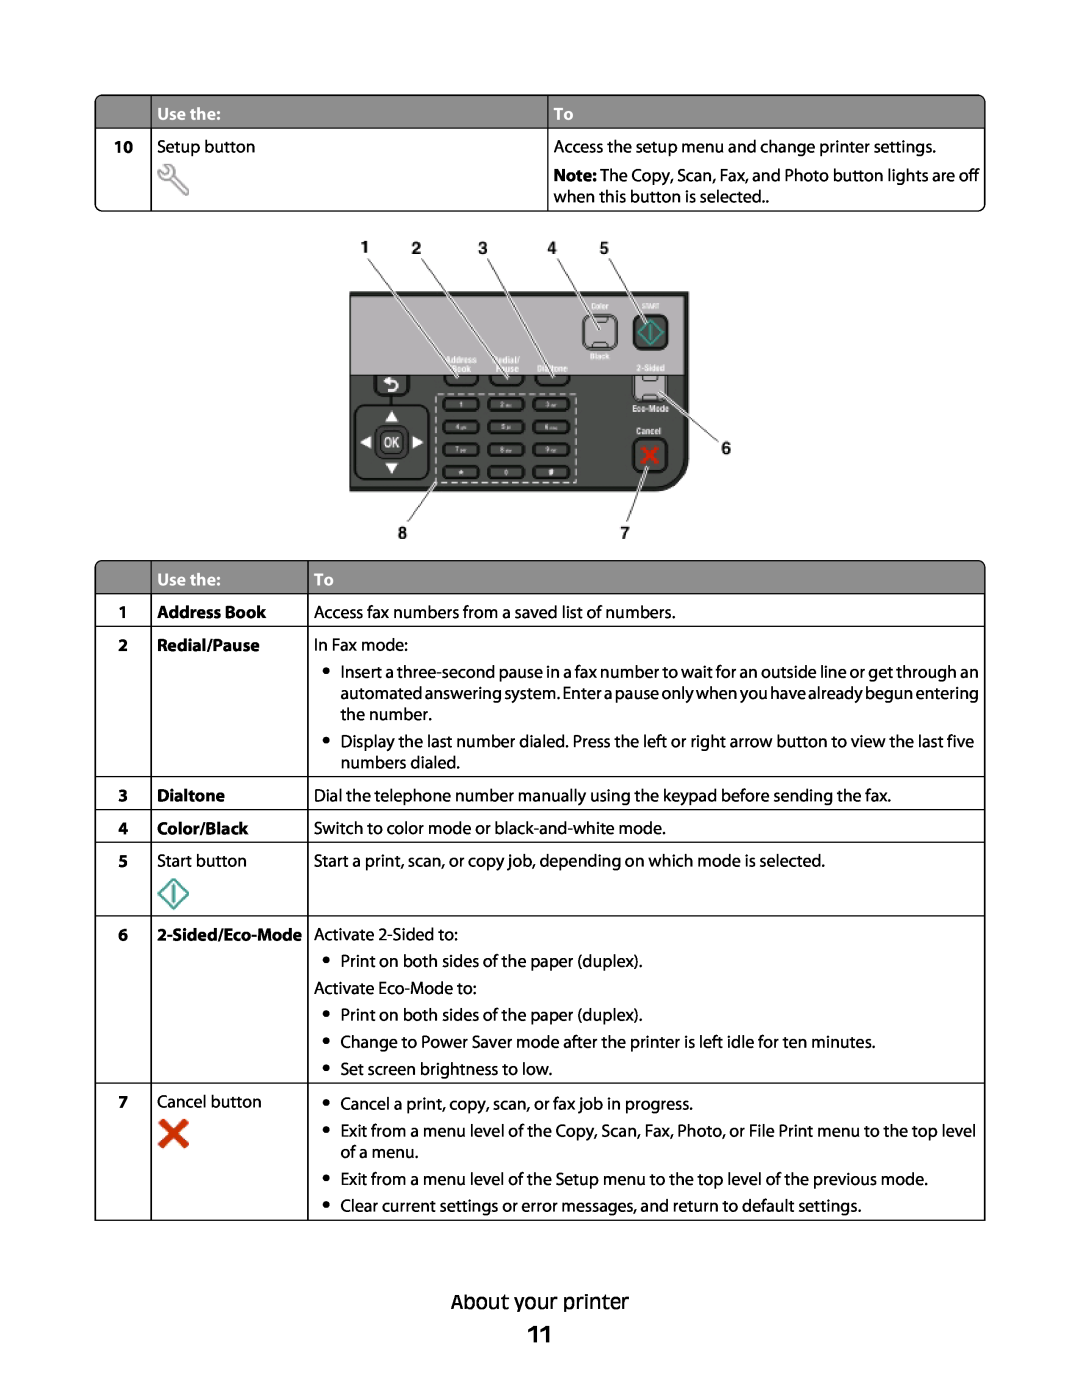 Lexmark Pro207, Pro208, Pro205 manual Use the, 1 2 3 4, Address Book Redial/Pause Dialtone Color/Black, Sided/Eco-Mode 